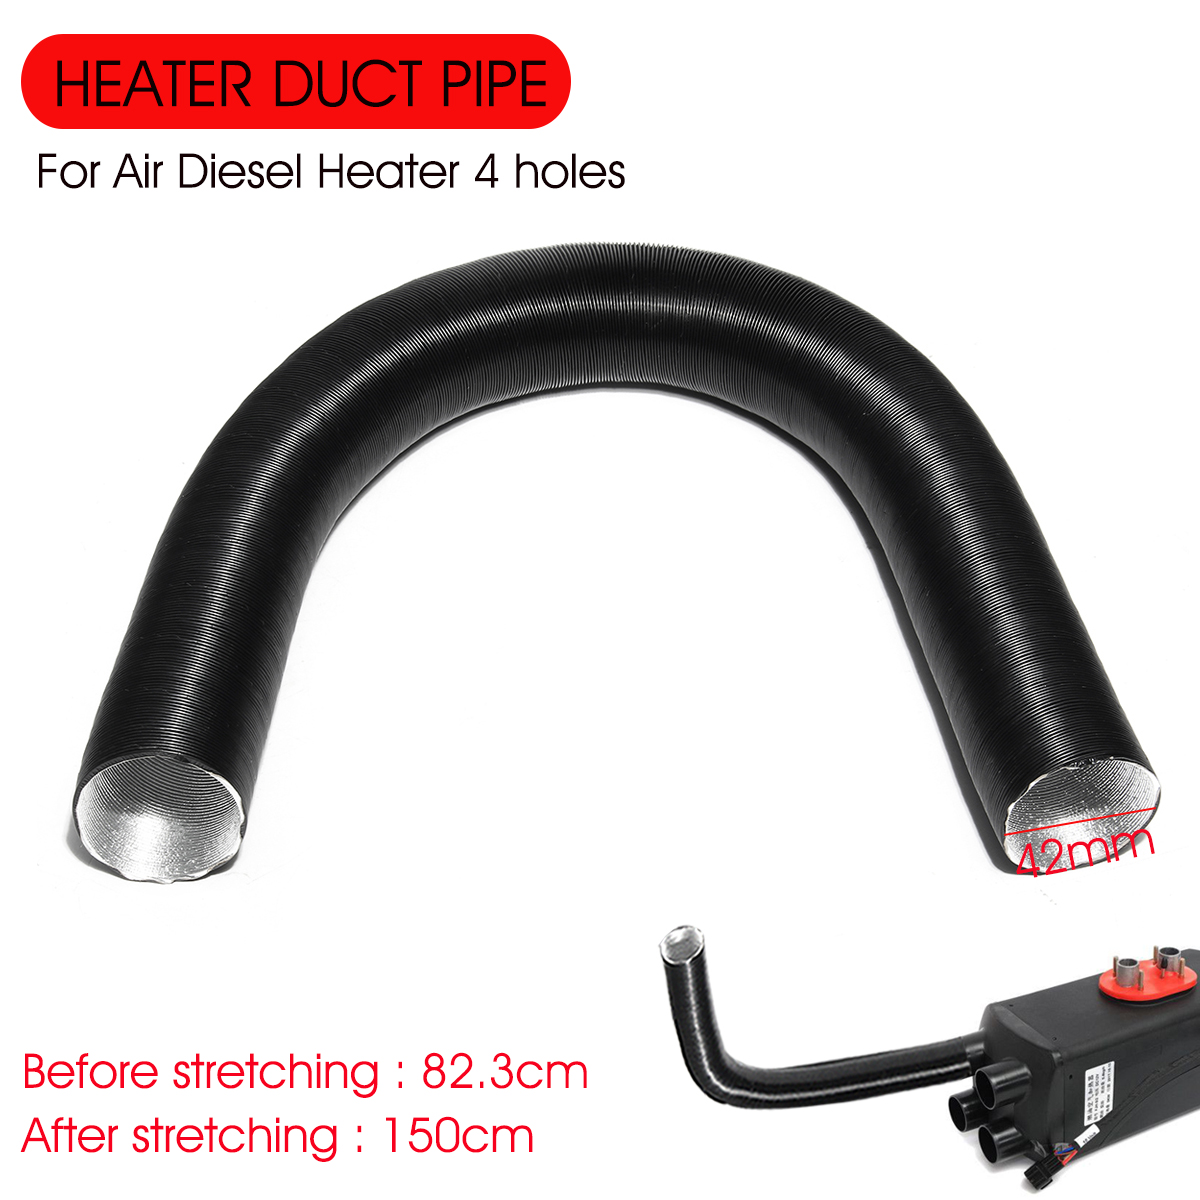 42mm-Outlet-Tube-Heater-Duct-Pipe-Air-Ducting-For-Air-Diesel-Heater-4-holes-Car-Truck-1632314-4